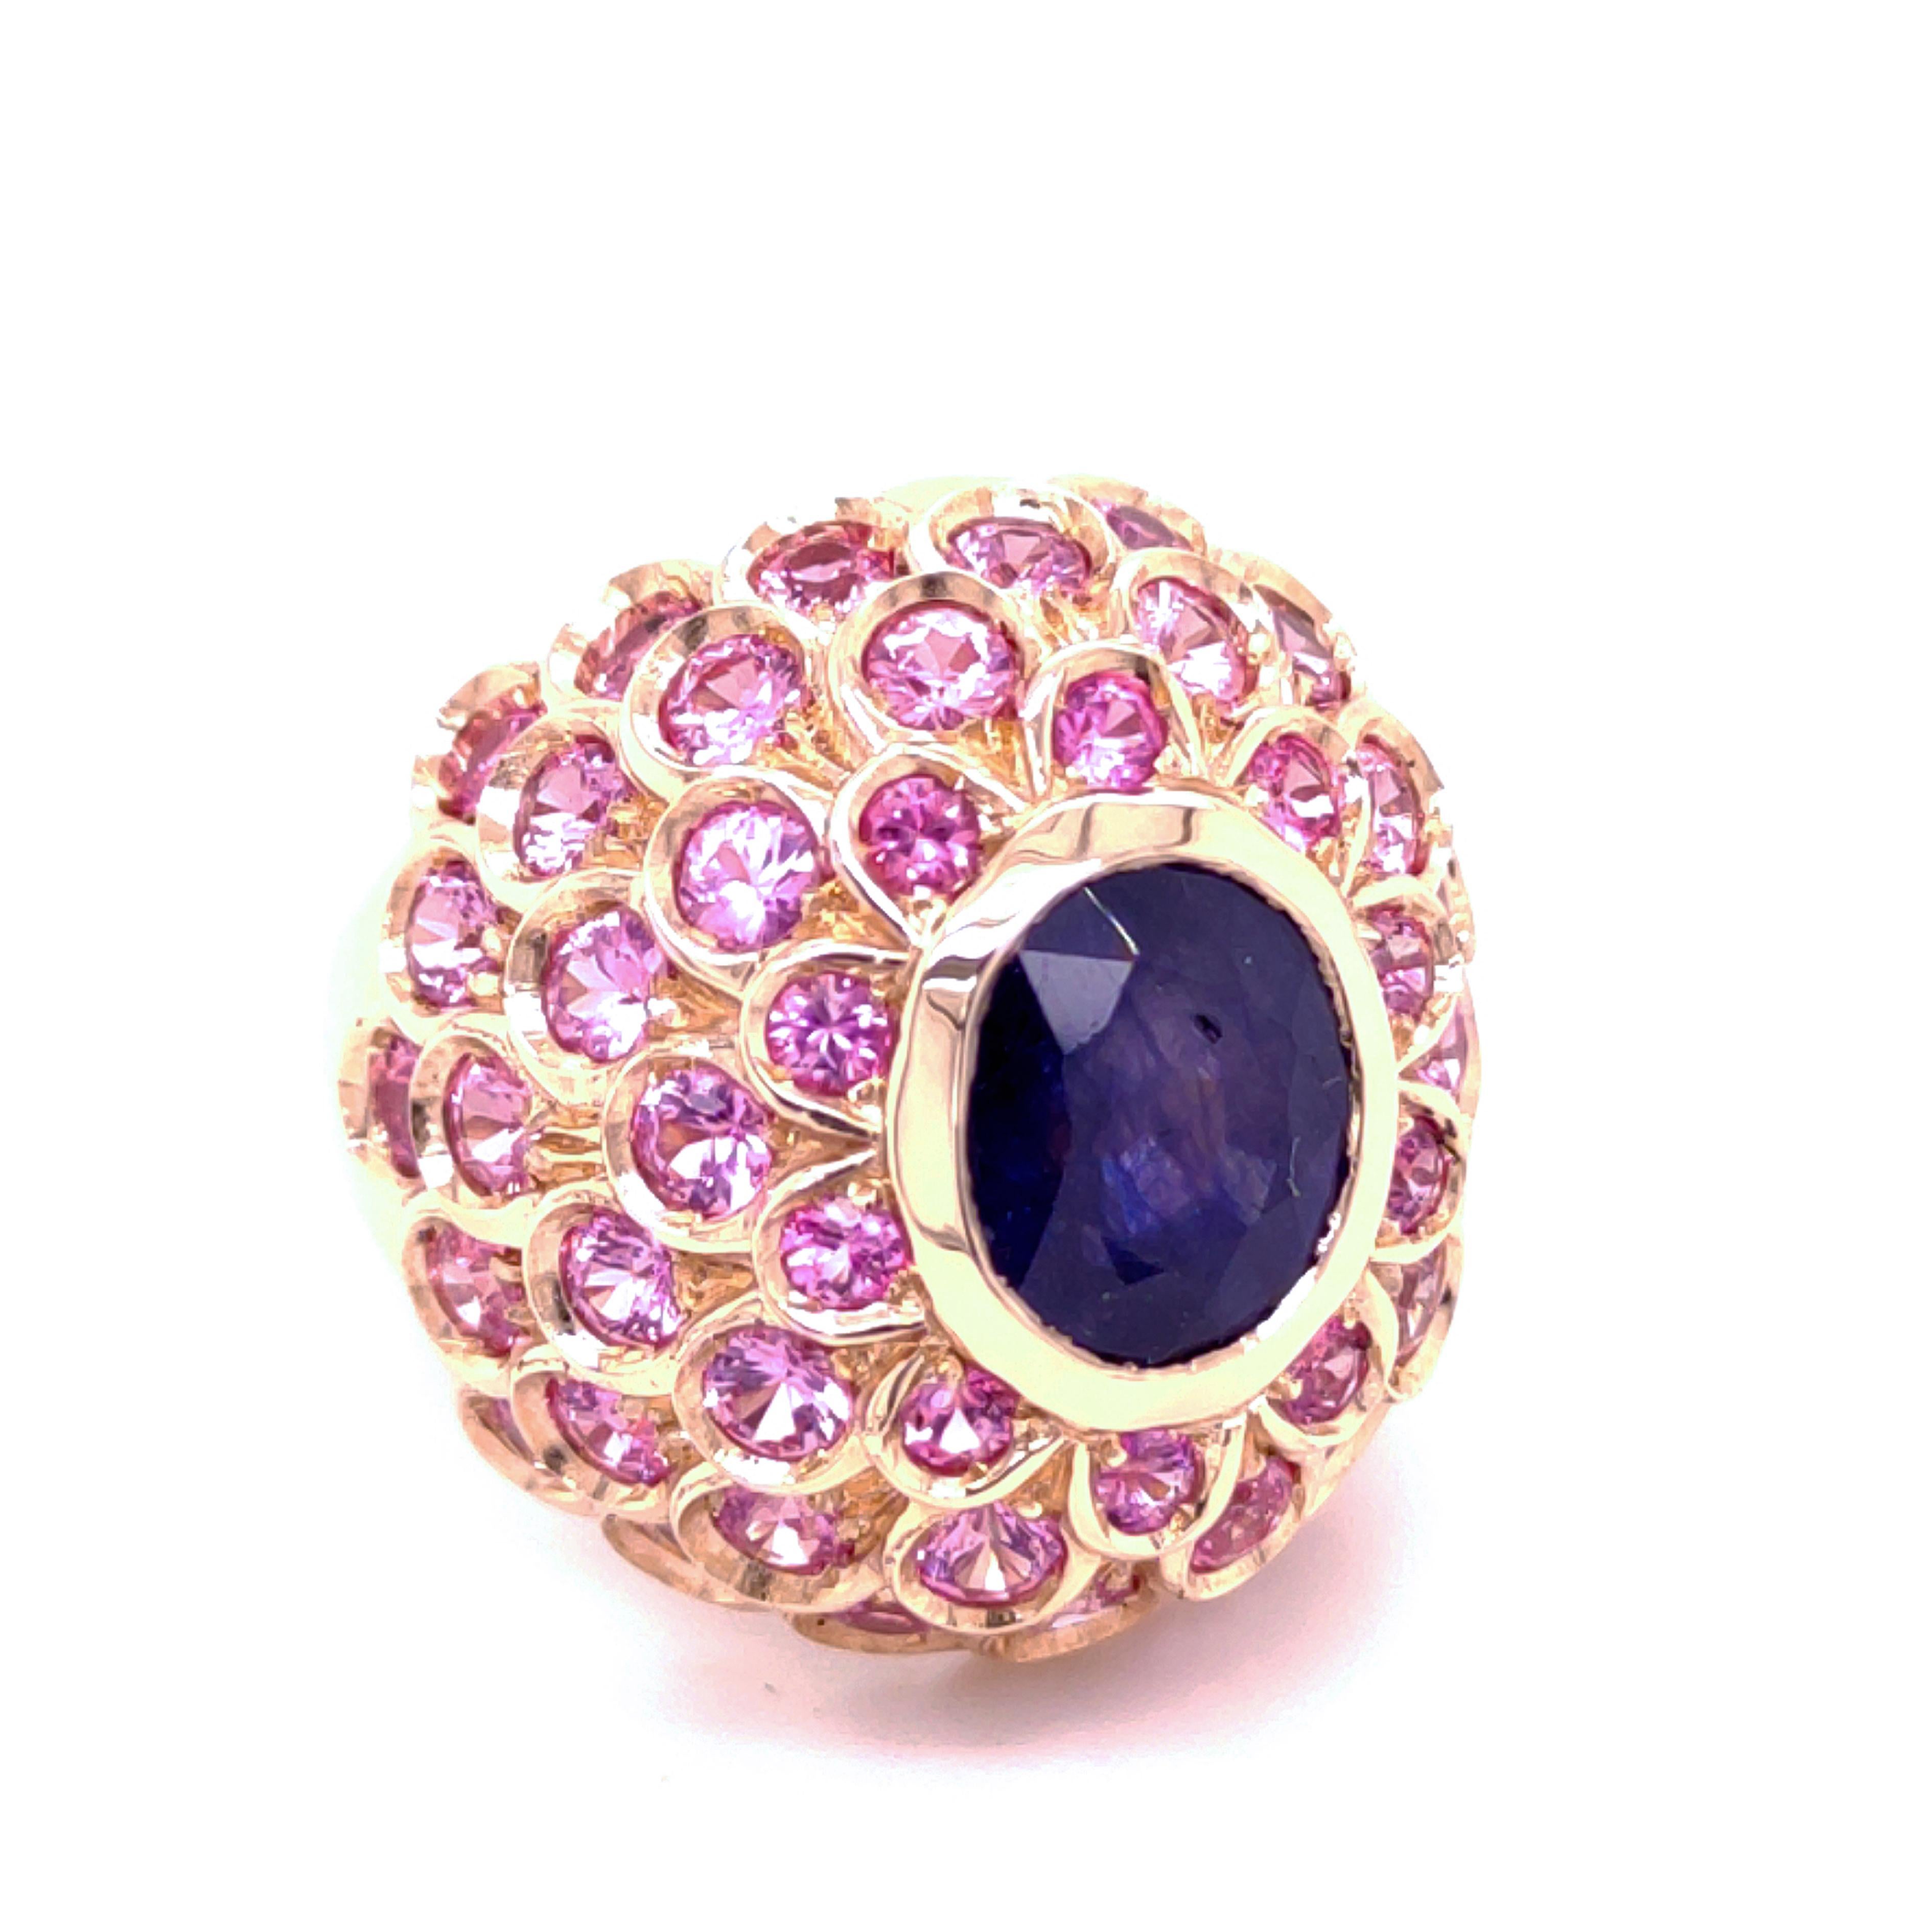 One-of-a-kind, Sumptuous, Unique yet Timeless Cocktail Ring Featuring 3.72kt Natural Oval Cut Blue Sapphire in a Rose Gold 4,32kt Brilliant Cut Pink Sapphire Setting.
Absolutely perfect to wear also as unique pinkie ring. 
In Our Fitted Dark Brown